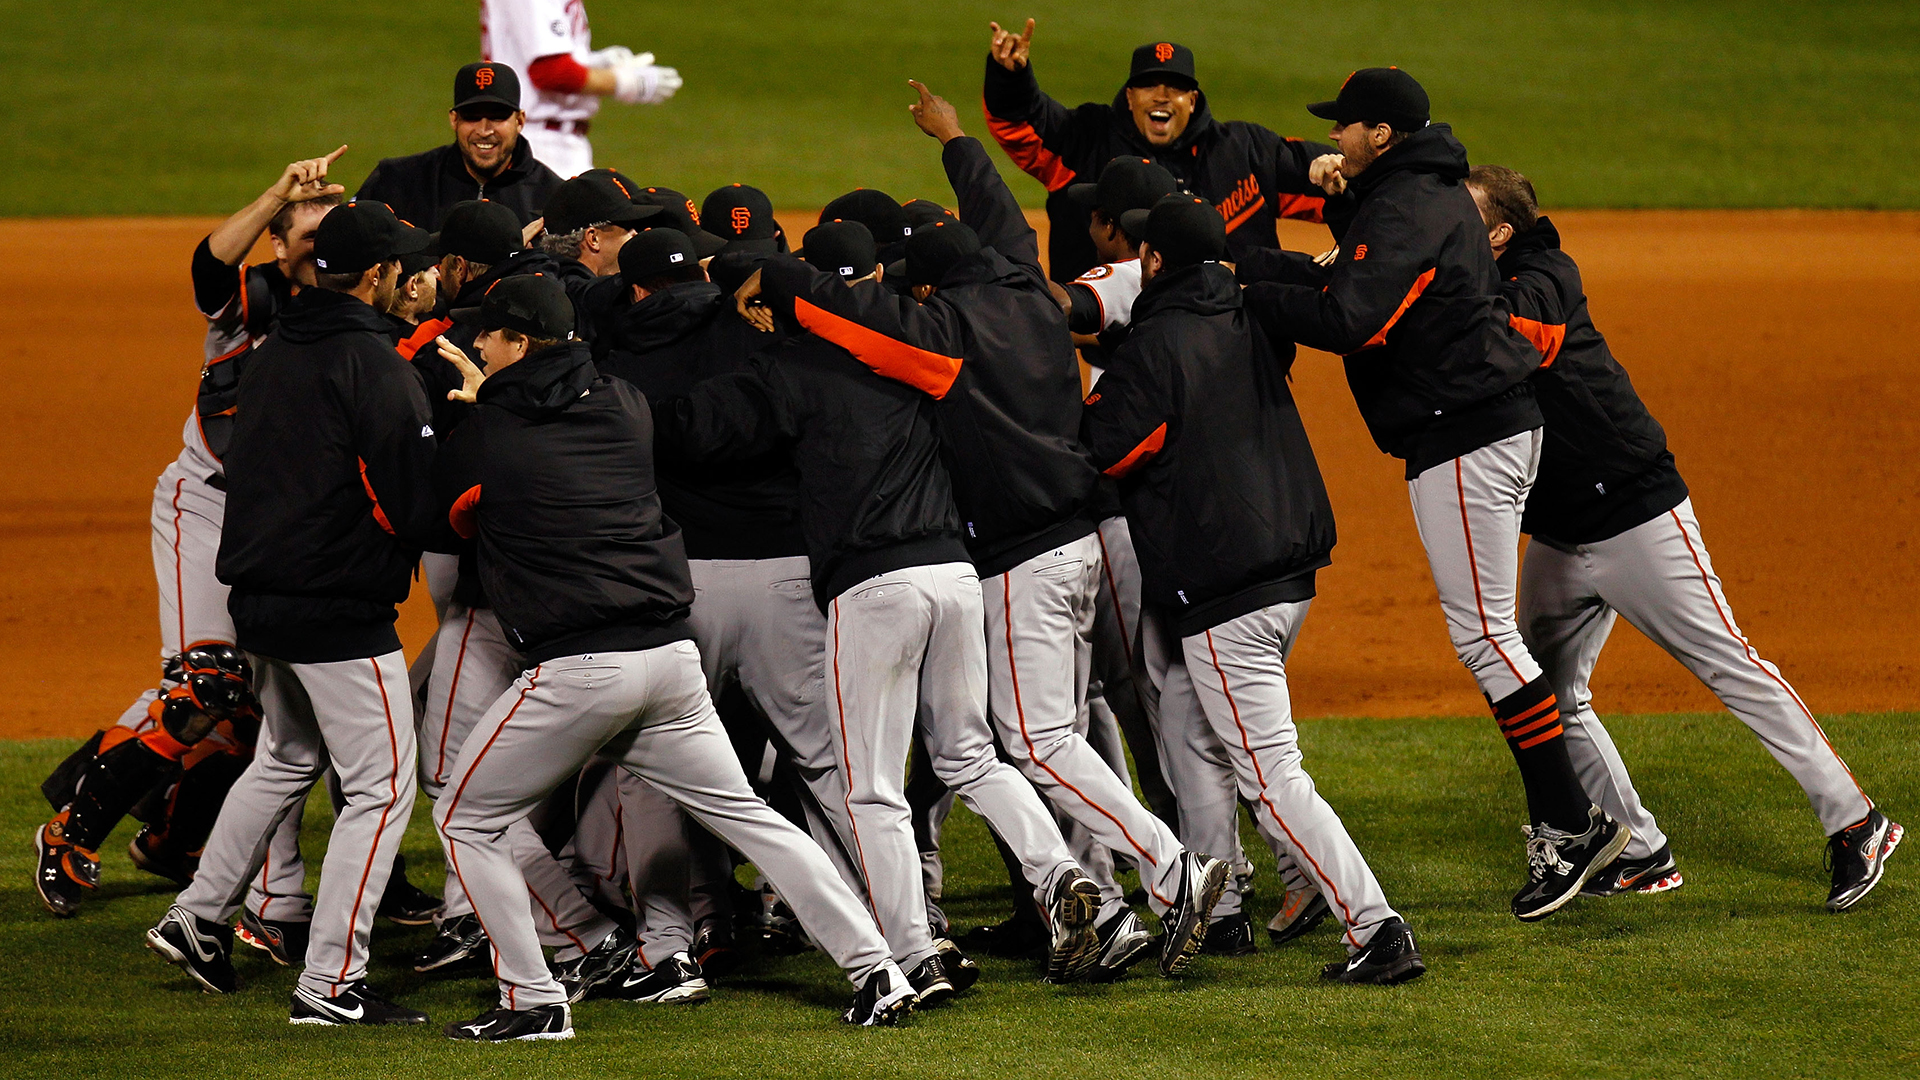 Giants' 2010 World Series run gave us 10 moments we'll never